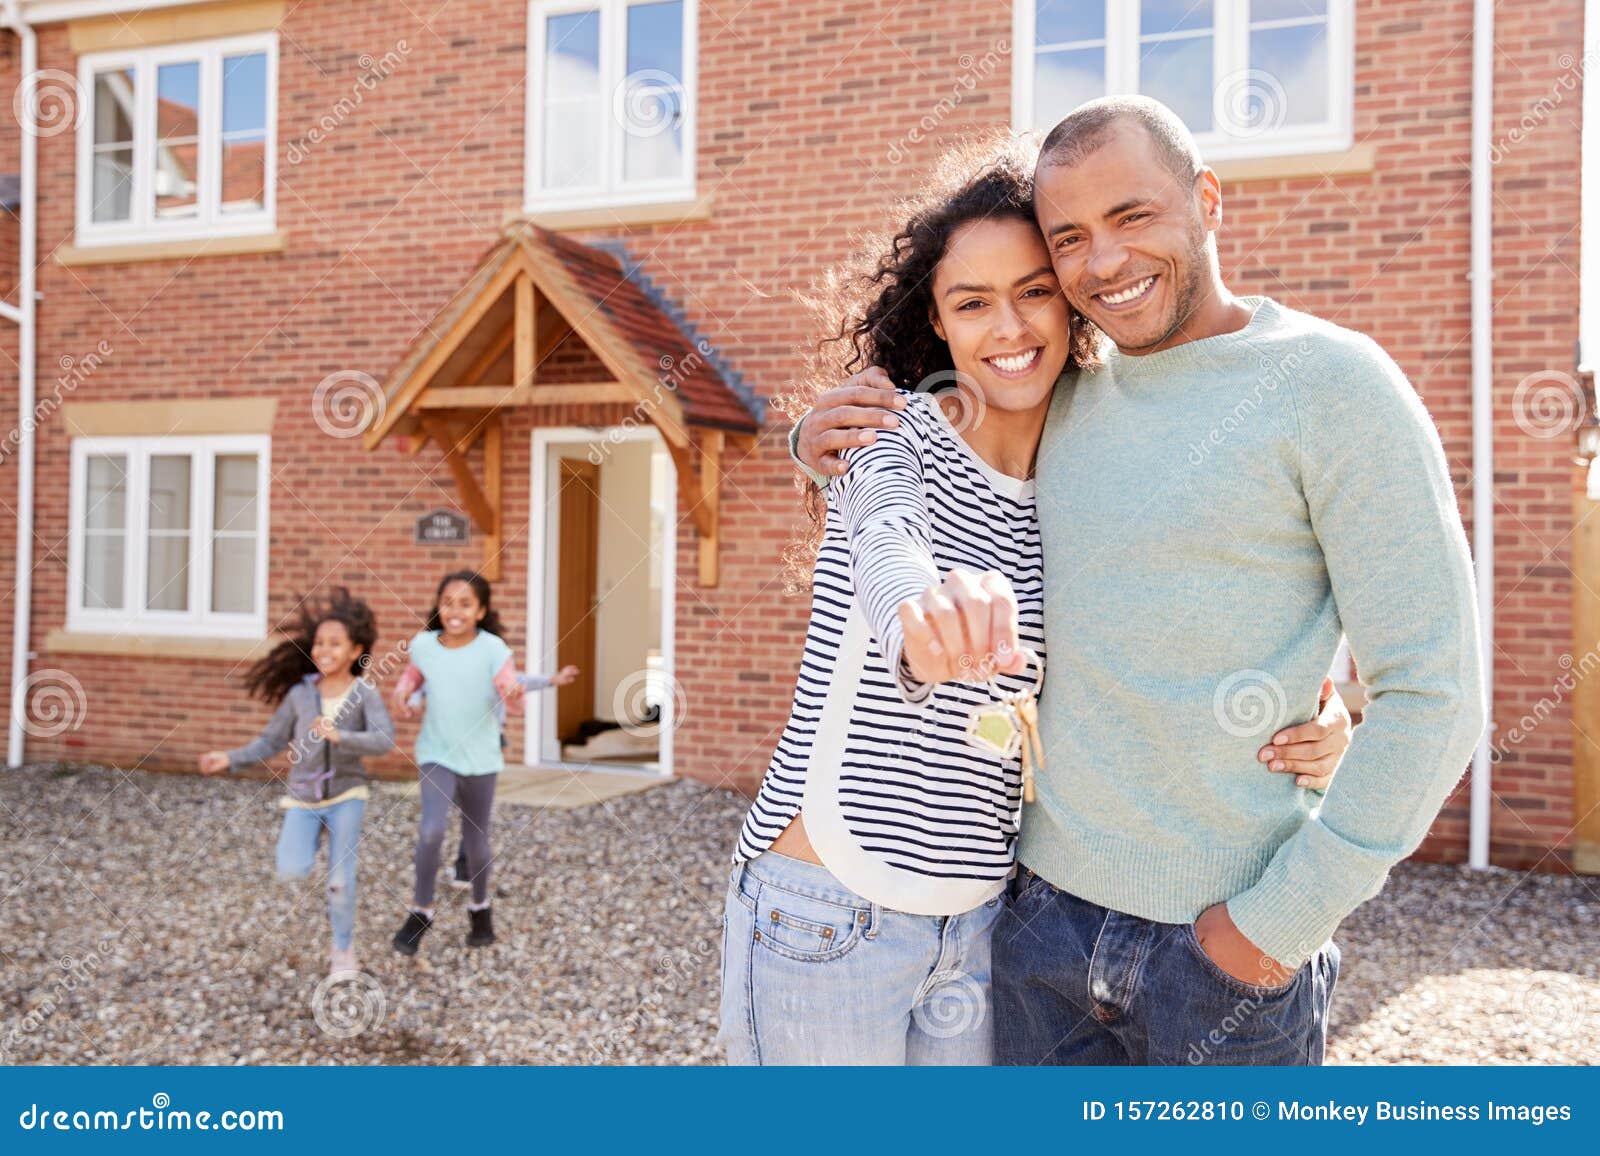 portrait of family holding keys standing outside new home on moving day